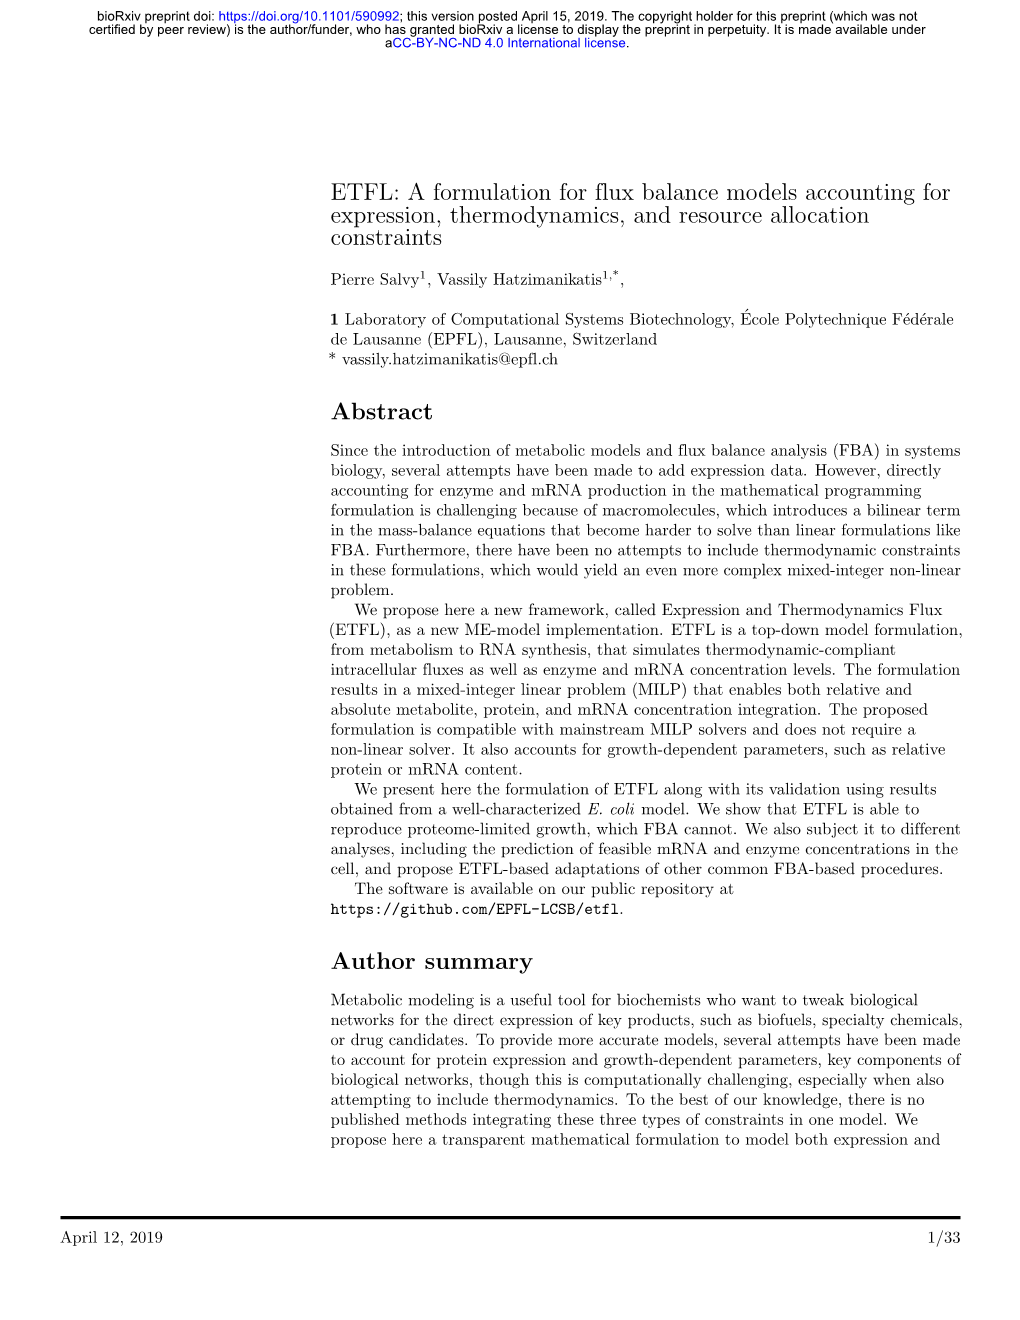 ETFL: a Formulation for Flux Balance Models Accounting for Expression, Thermodynamics, and Resource Allocation Constraints